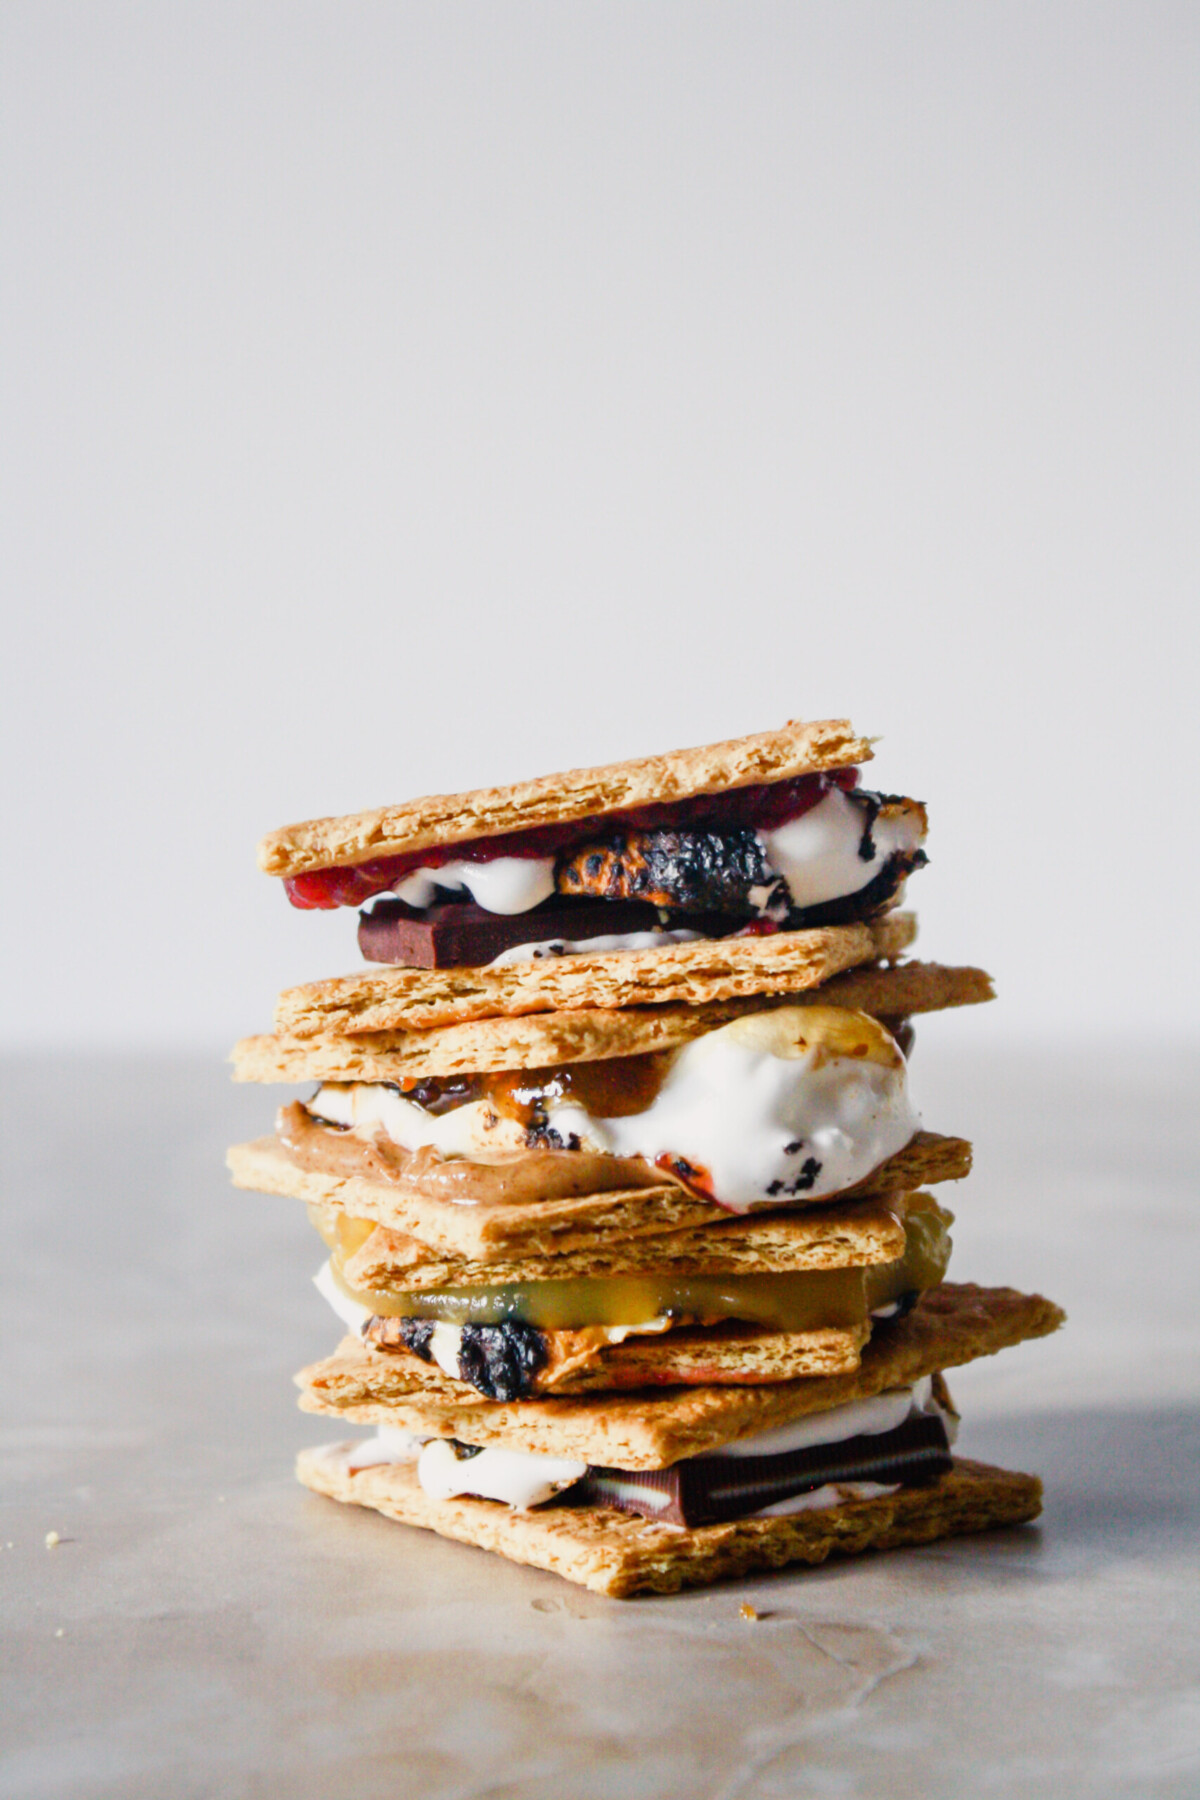 Photograph of s'mores stacked on top of each other on a marble table